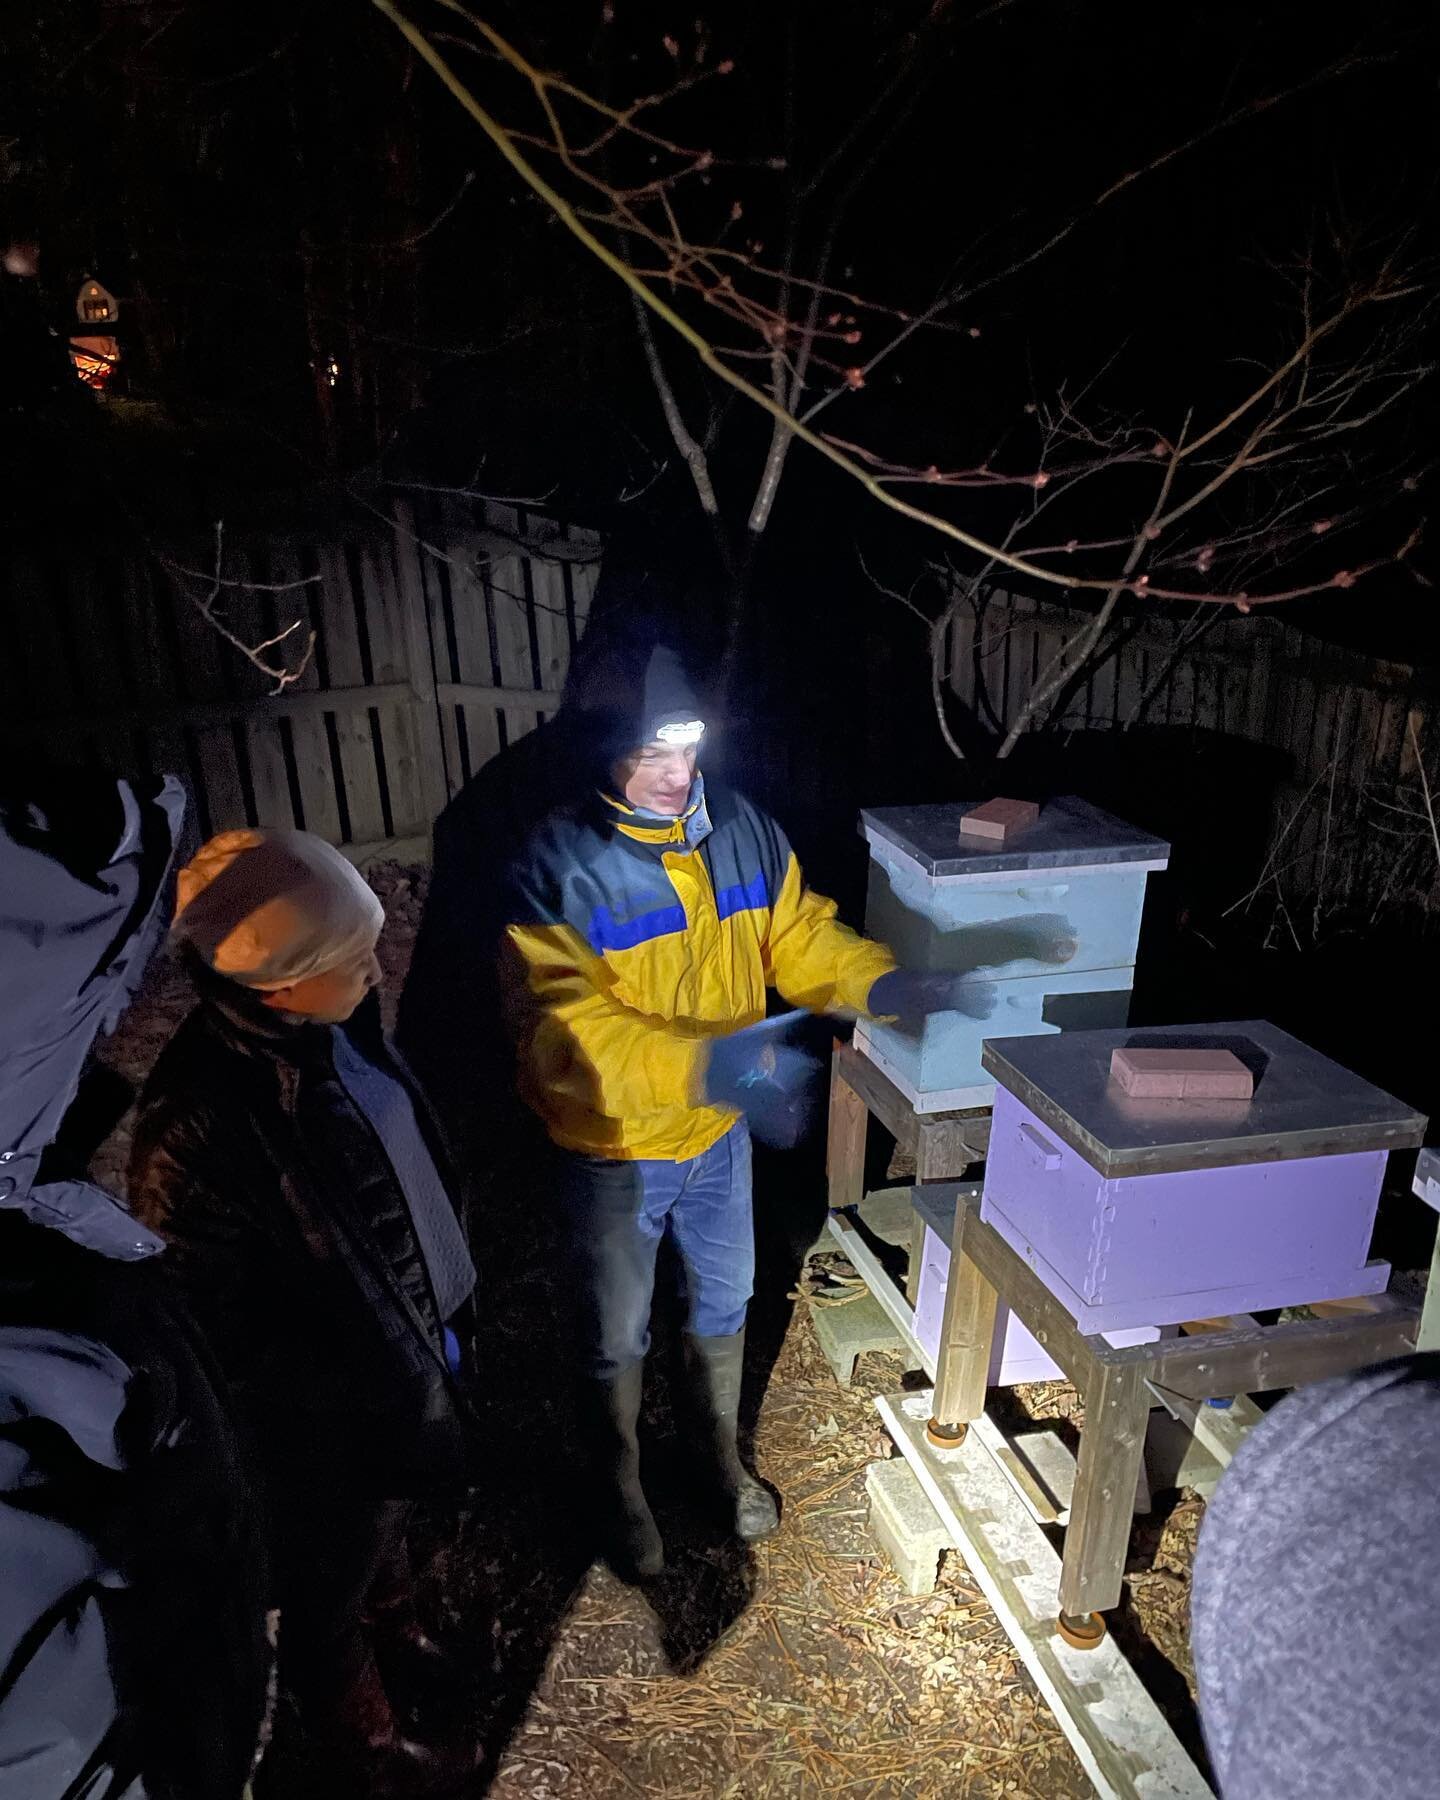 We remember the evening that we took delivery of our colony like it was yesterday. 

Here are a few photos of us transporting our &ldquo;Magna Carta&rdquo; hive to our Apiary. 

Thank you to all of the Beekeepers who were a part of the journey from t